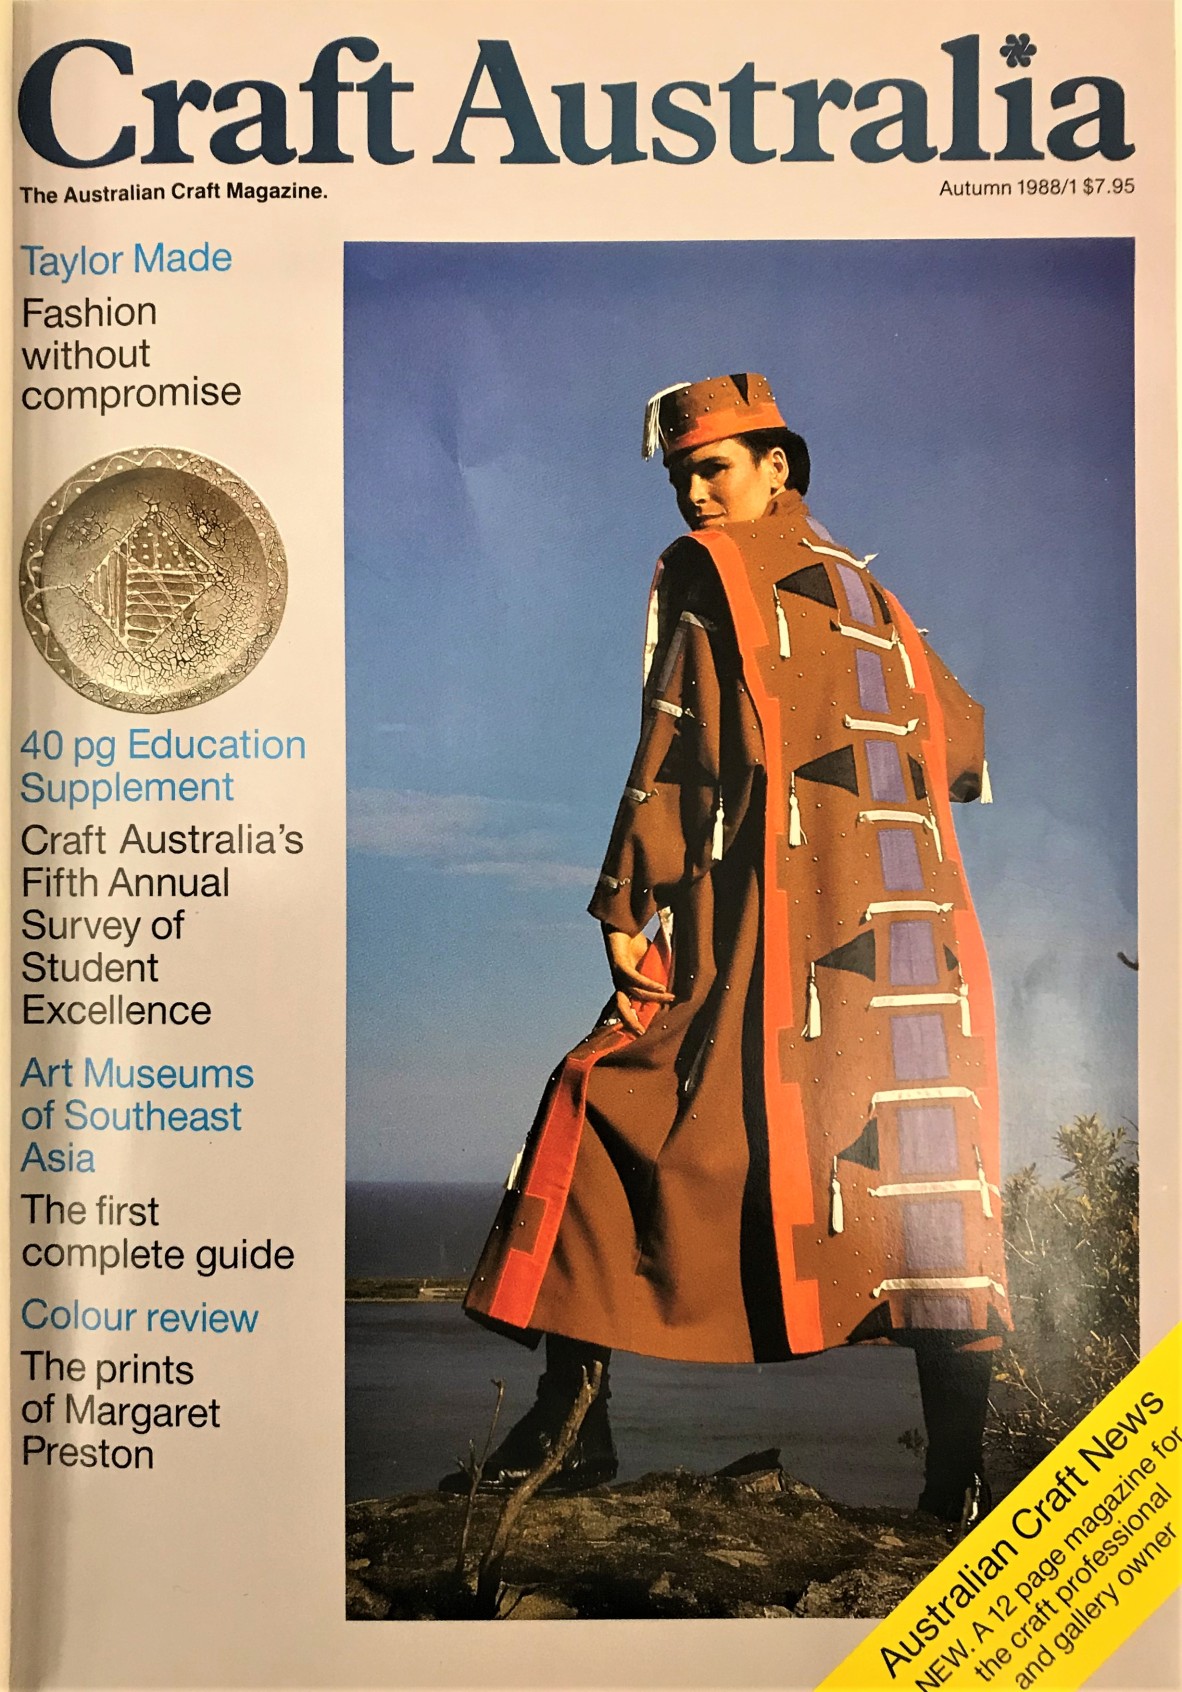 Image of front cover of Craft Australia magazine from Autumn 1988 with a woman wearing a brown and orange coat with matching hat